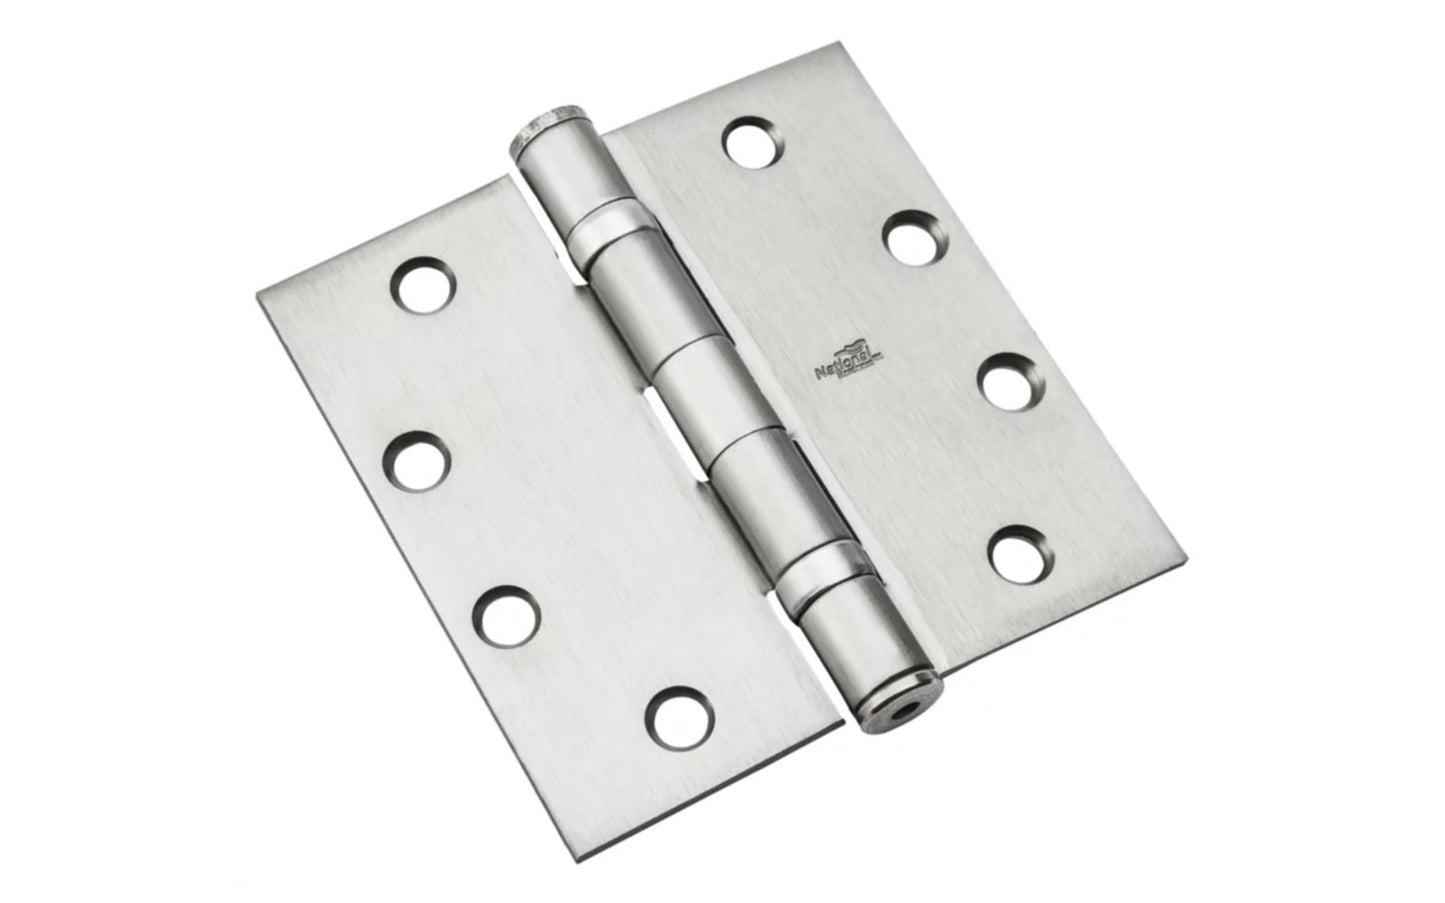 4-1/2" Satin Chrome Finish Finish Ball-Bearing Hinge is more durable & longer-lasting than standard hinges. Equipped with two permanently lubricated ball bearings for smoother & quieter operation. Template screw hole location for use on either wood or hollow metal doors & frames. National Hardware Model No. N236-010.